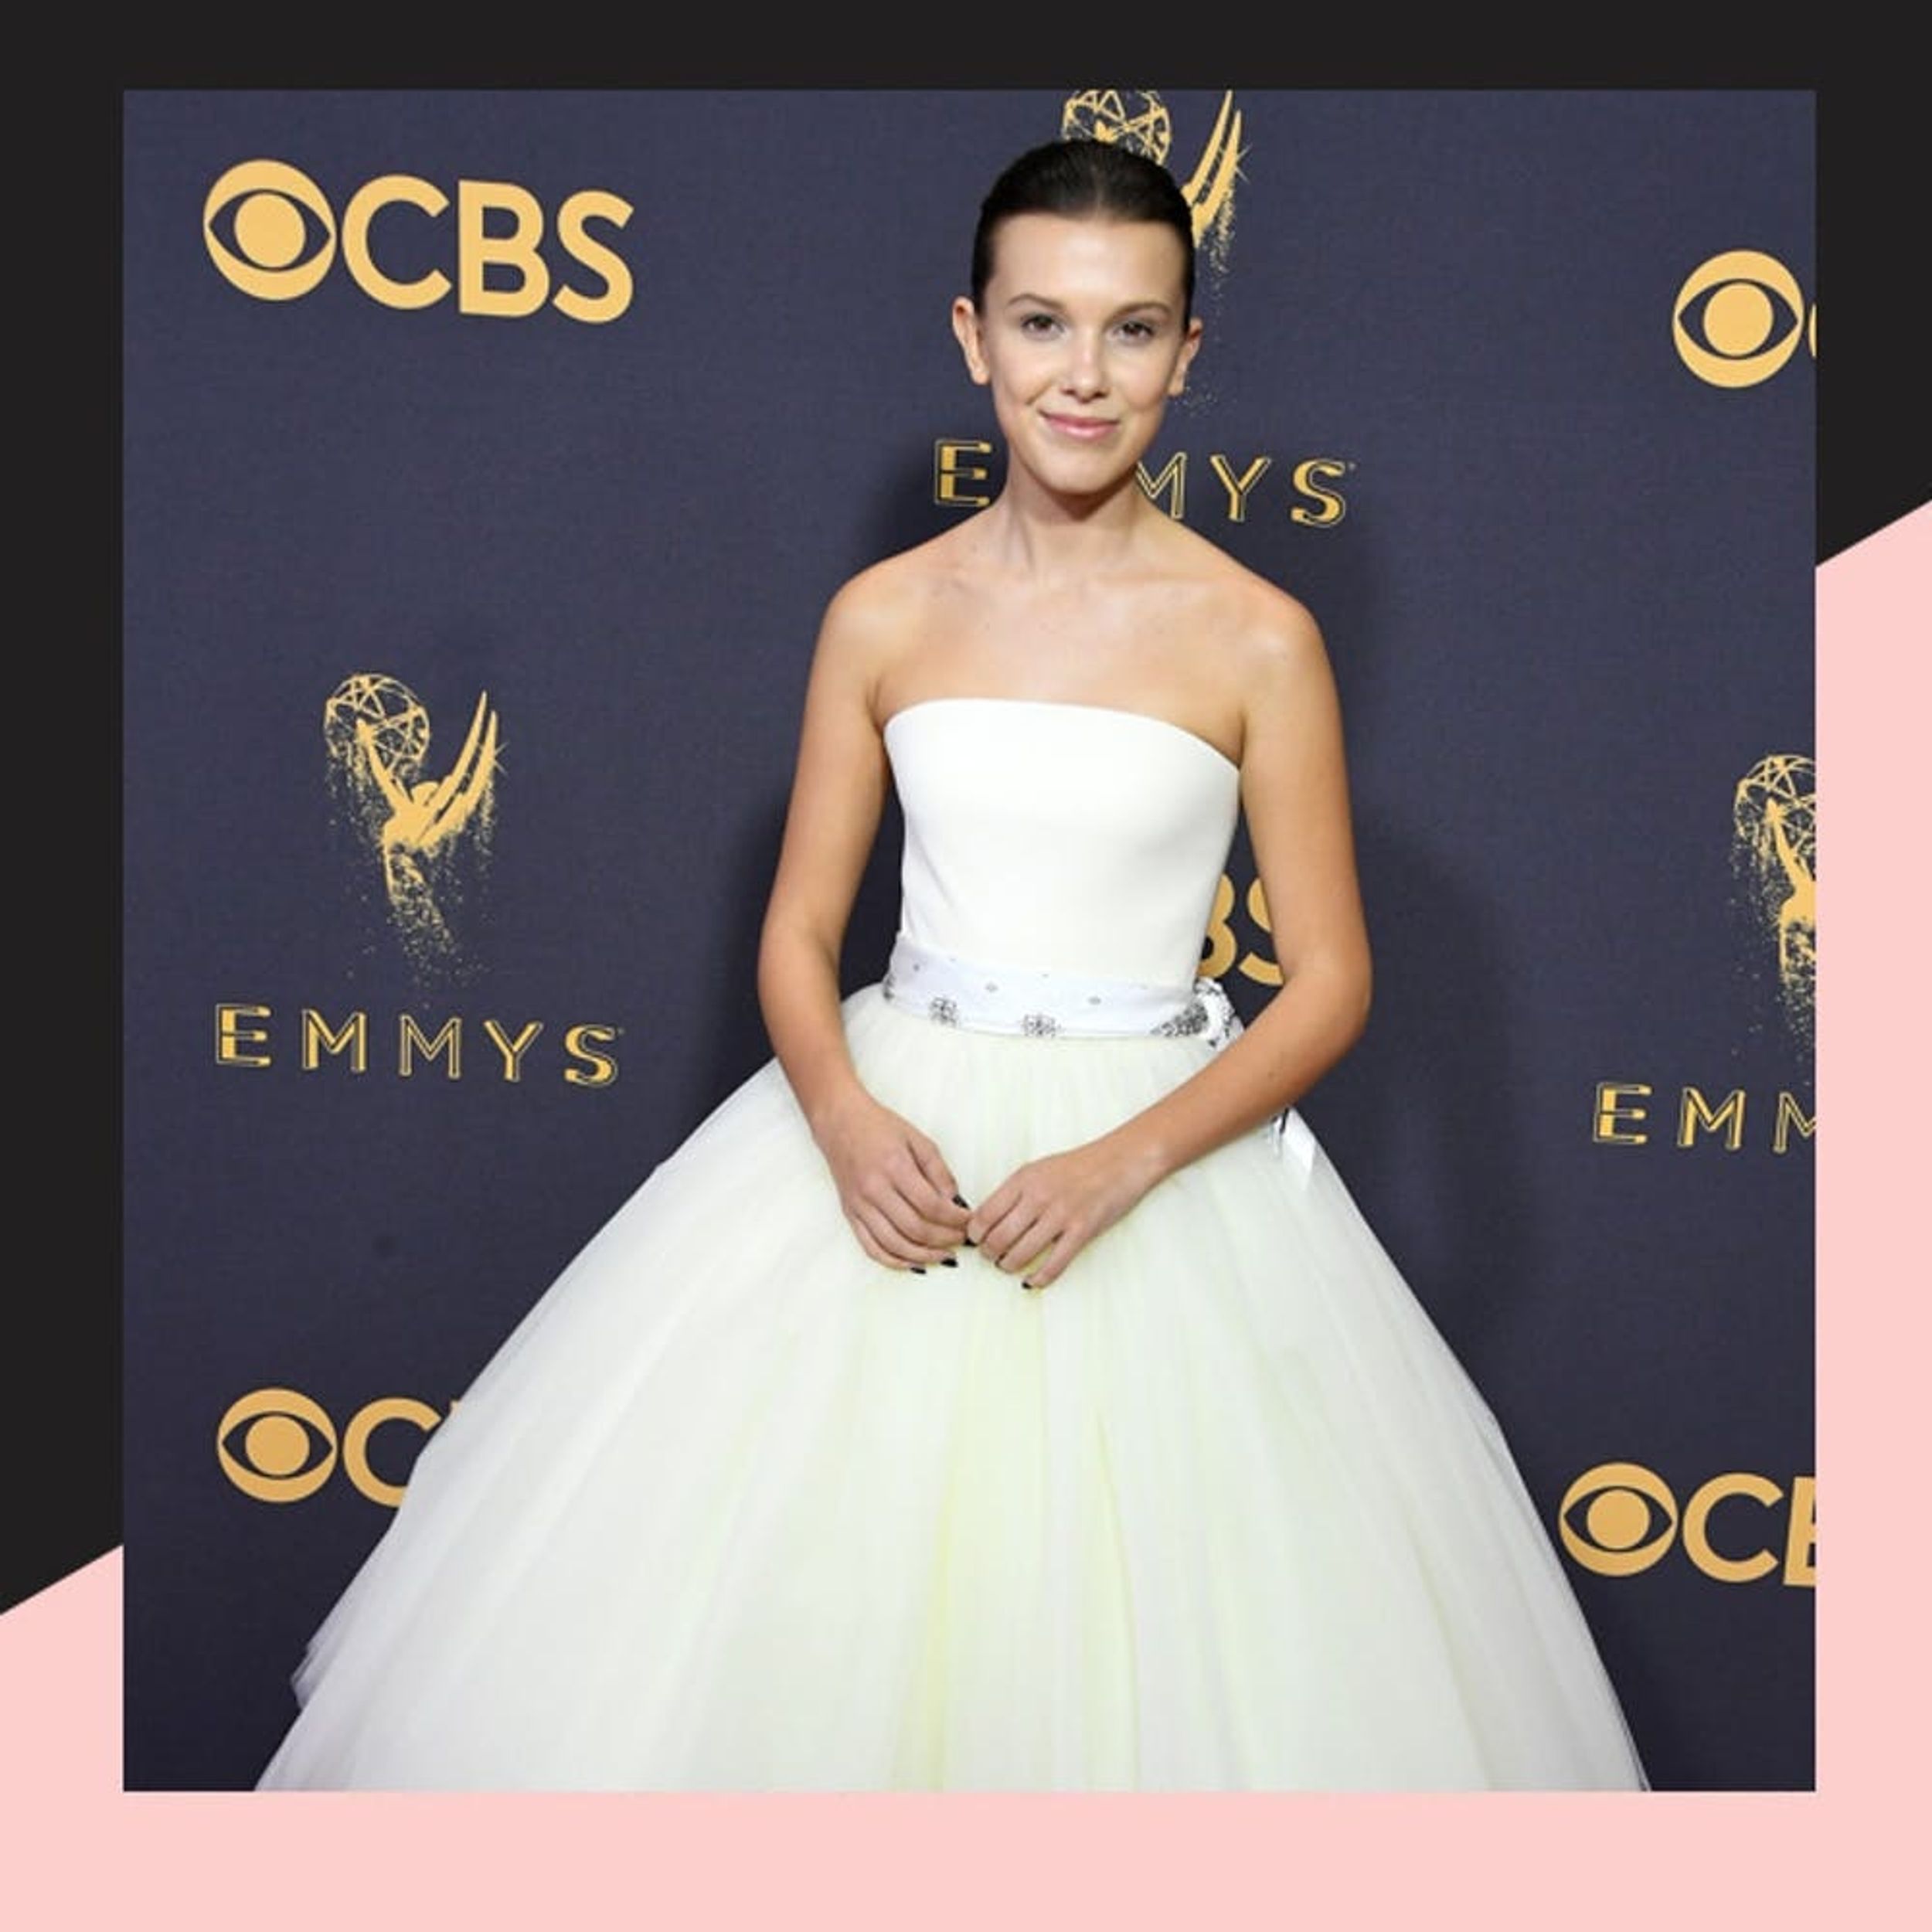 Emmys 2017 Red Carpet: Millie Bobby Brown Looks Like a Sophisticated Snow Queen